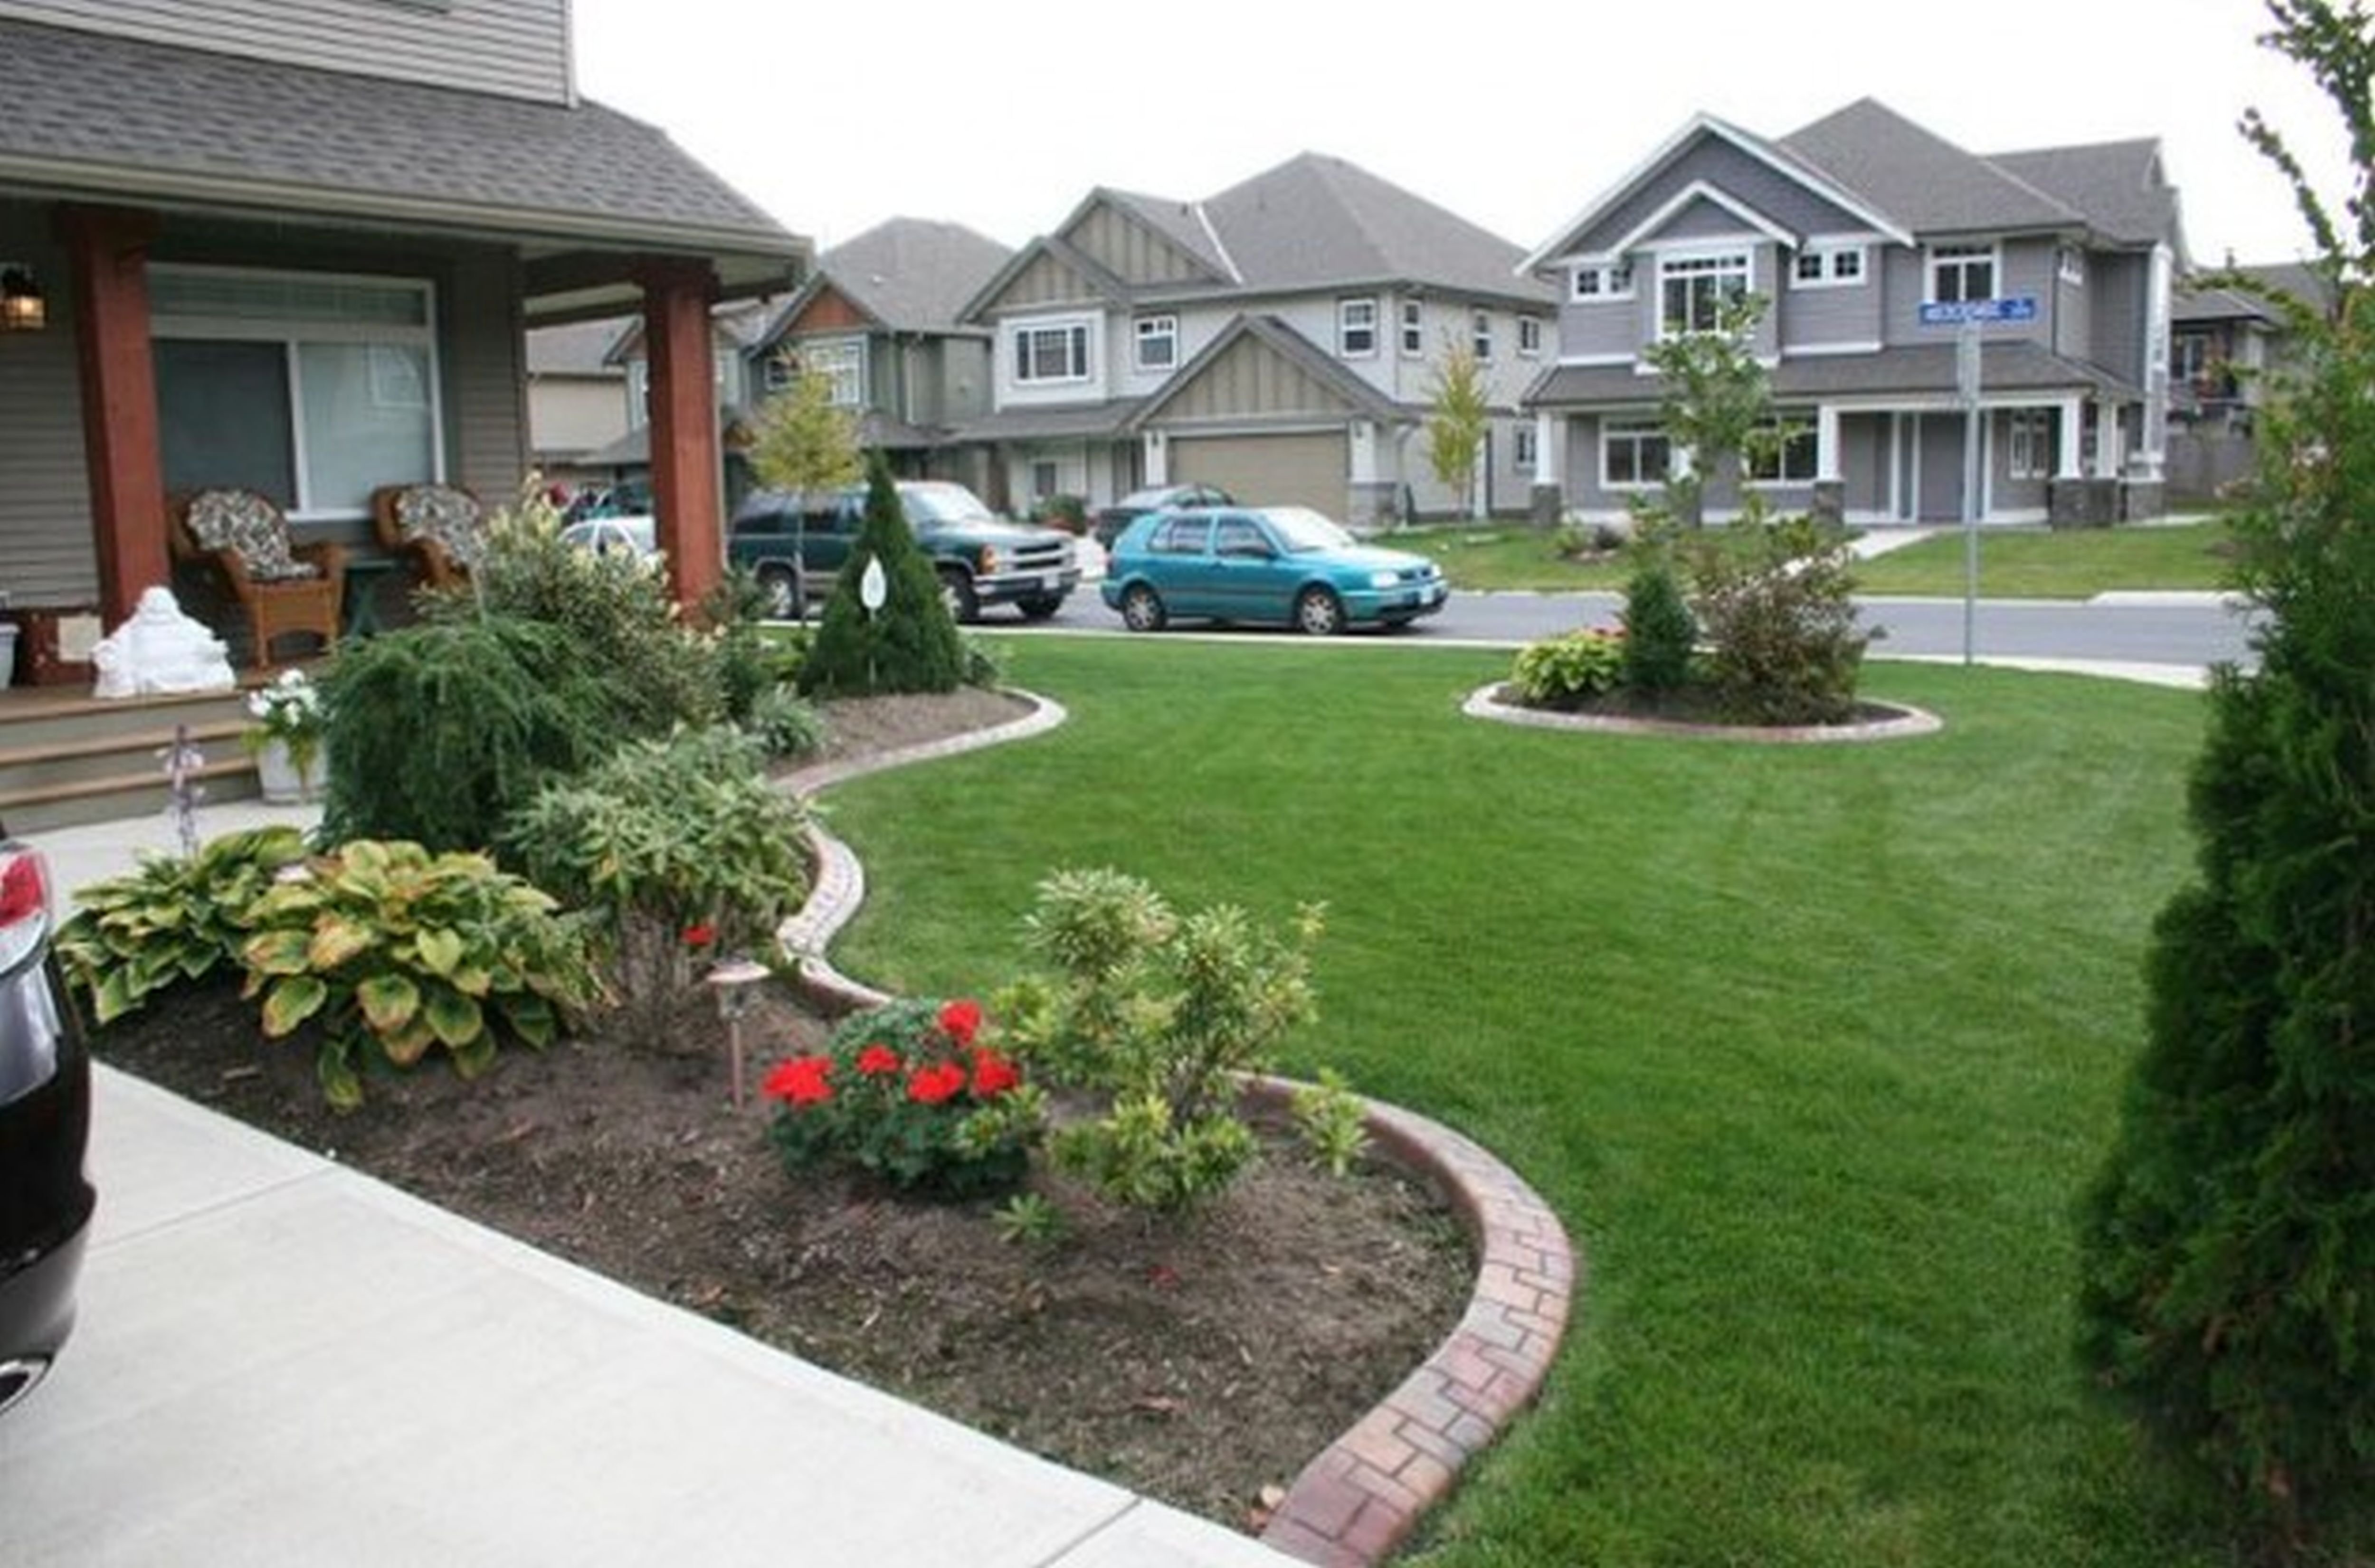 Landscaping Ideas For A Front Yard - Image to u